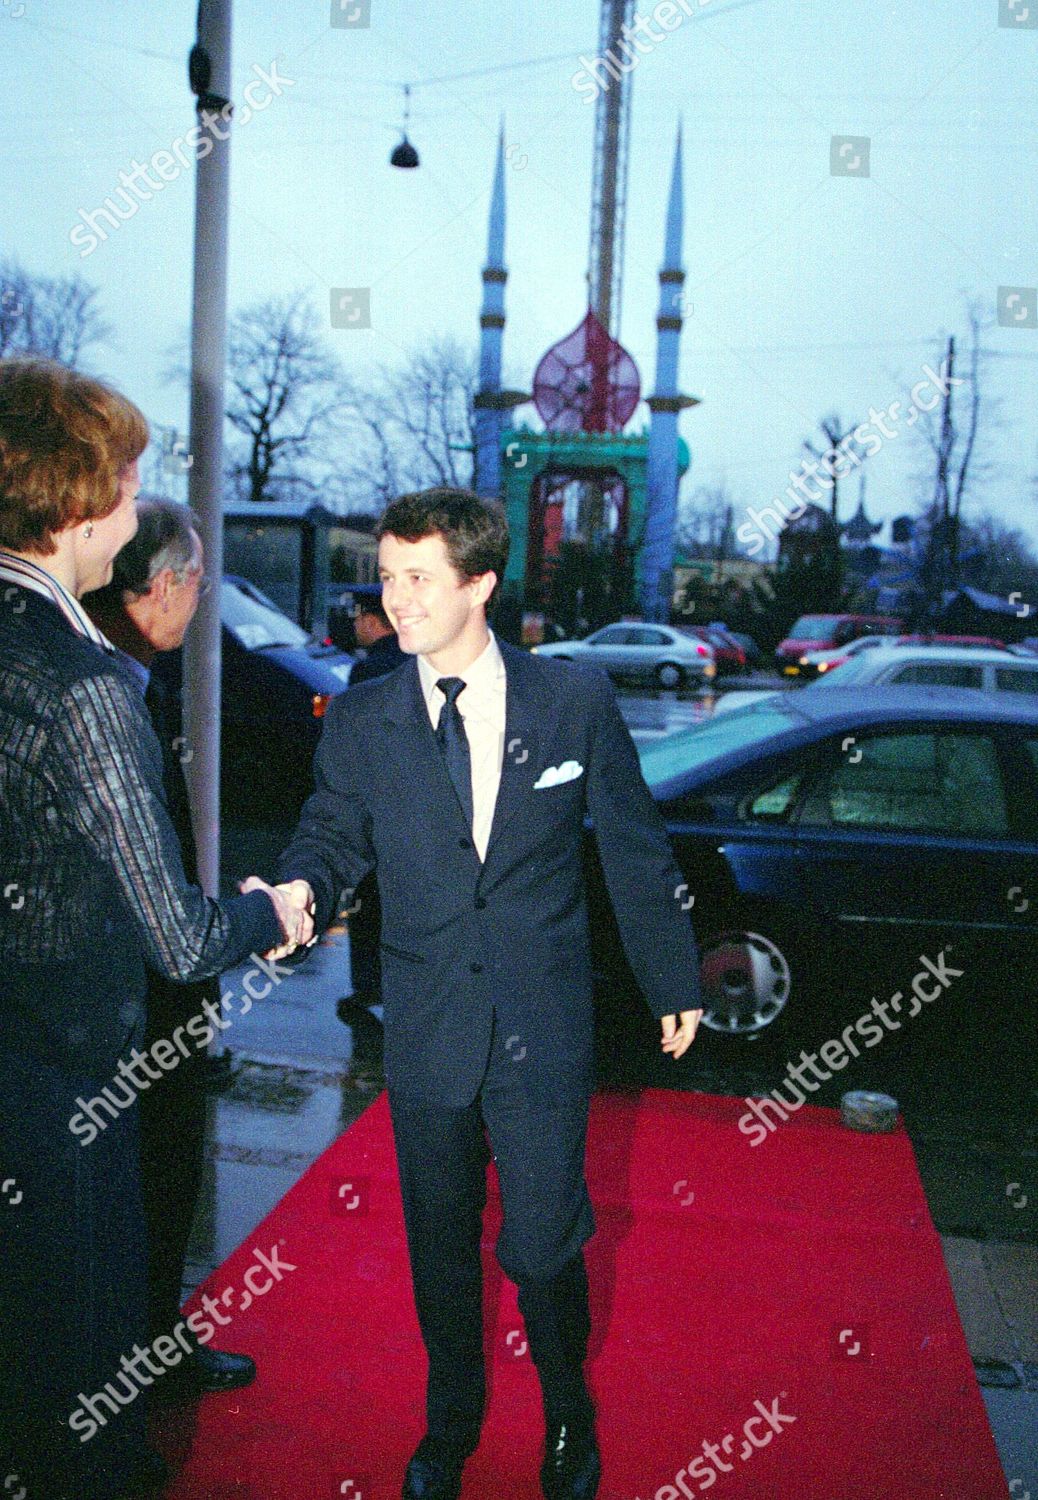 crown-prince-frederik-opening-the-never-green-and-ever-green-exhibition-denmark-shutterstock-editorial-376829k.jpg